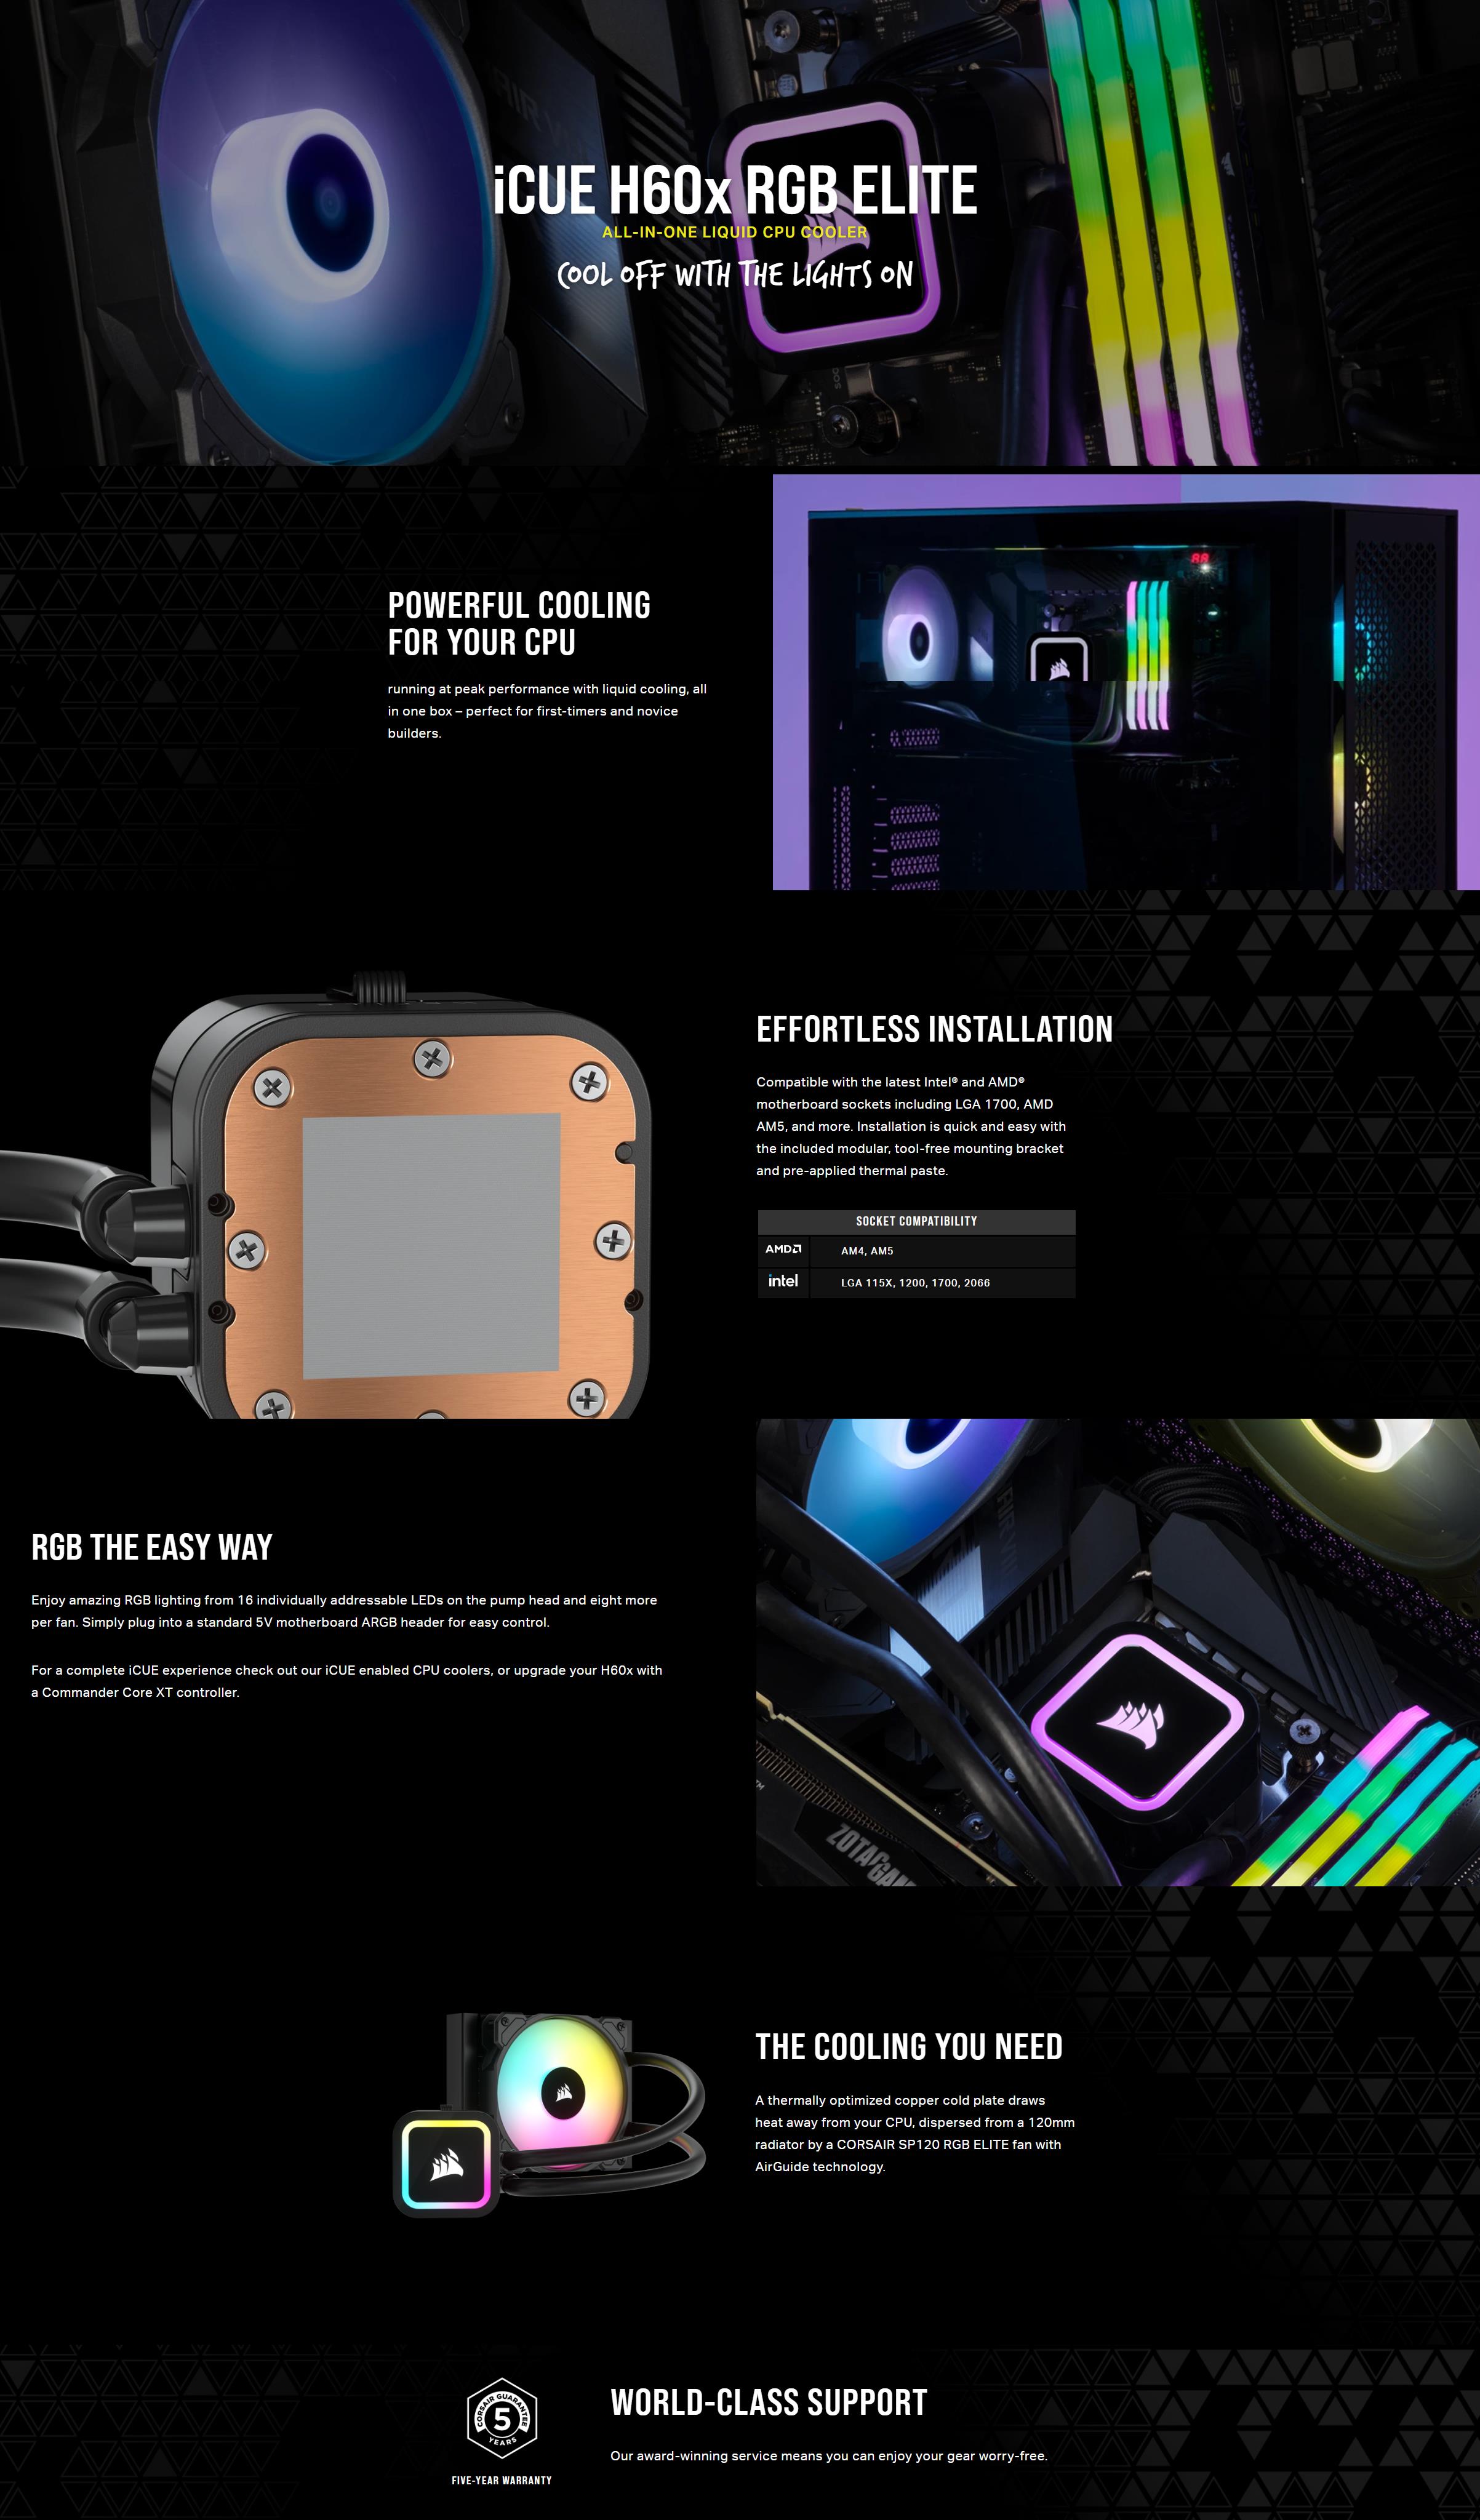 A large marketing image providing additional information about the product Corsair iCUE H60x RGB ELITE Liquid CPU Cooler - Additional alt info not provided